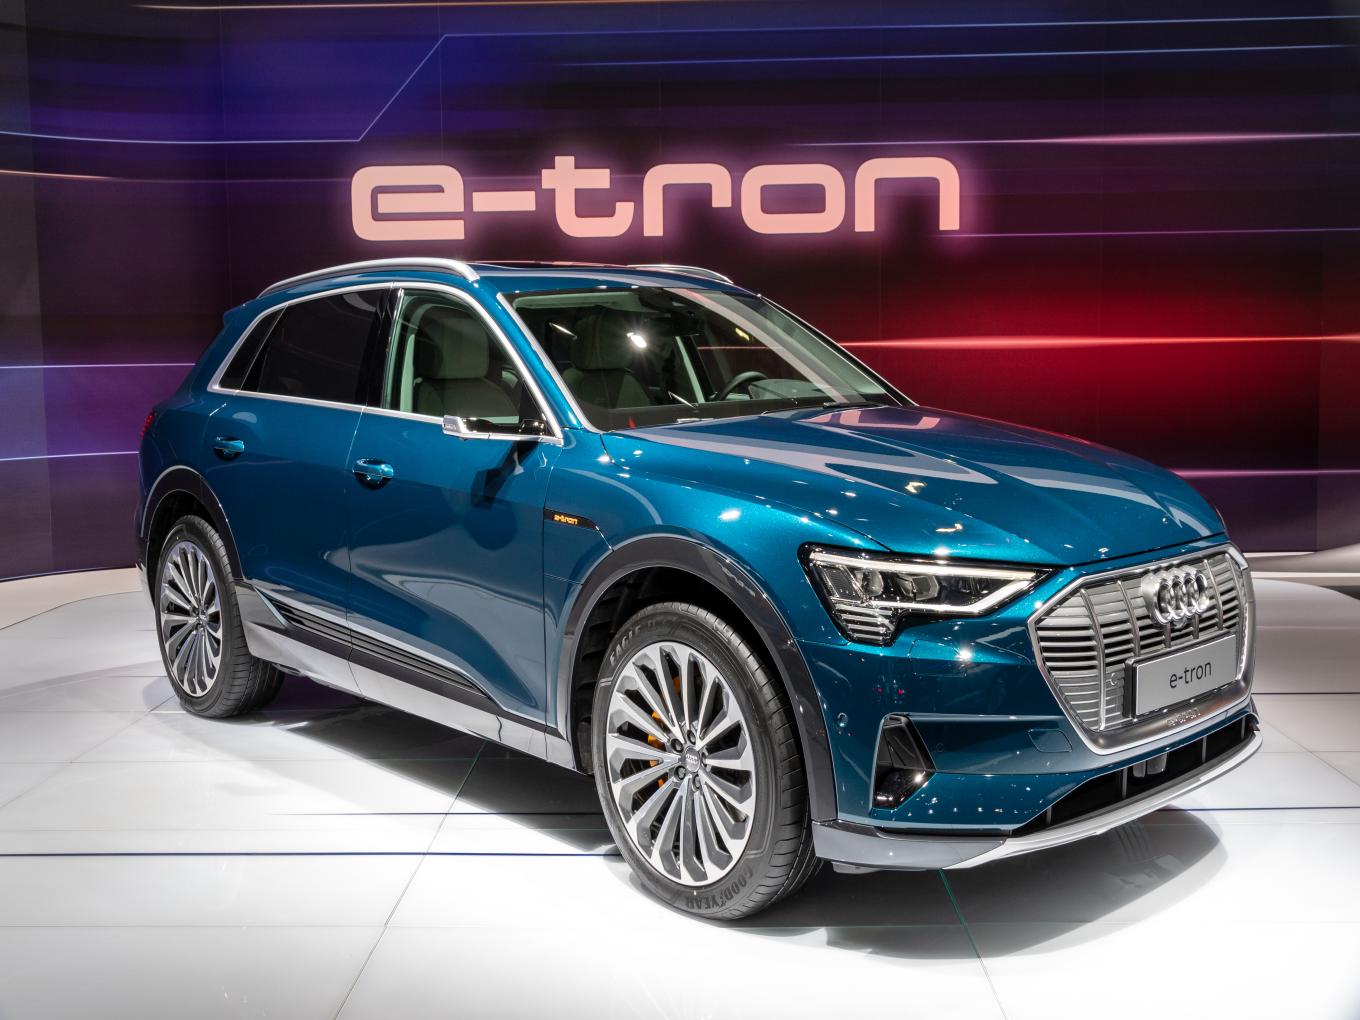 Will Bring E-Tron To India Despite Duty Setback At Budget, Says Audi